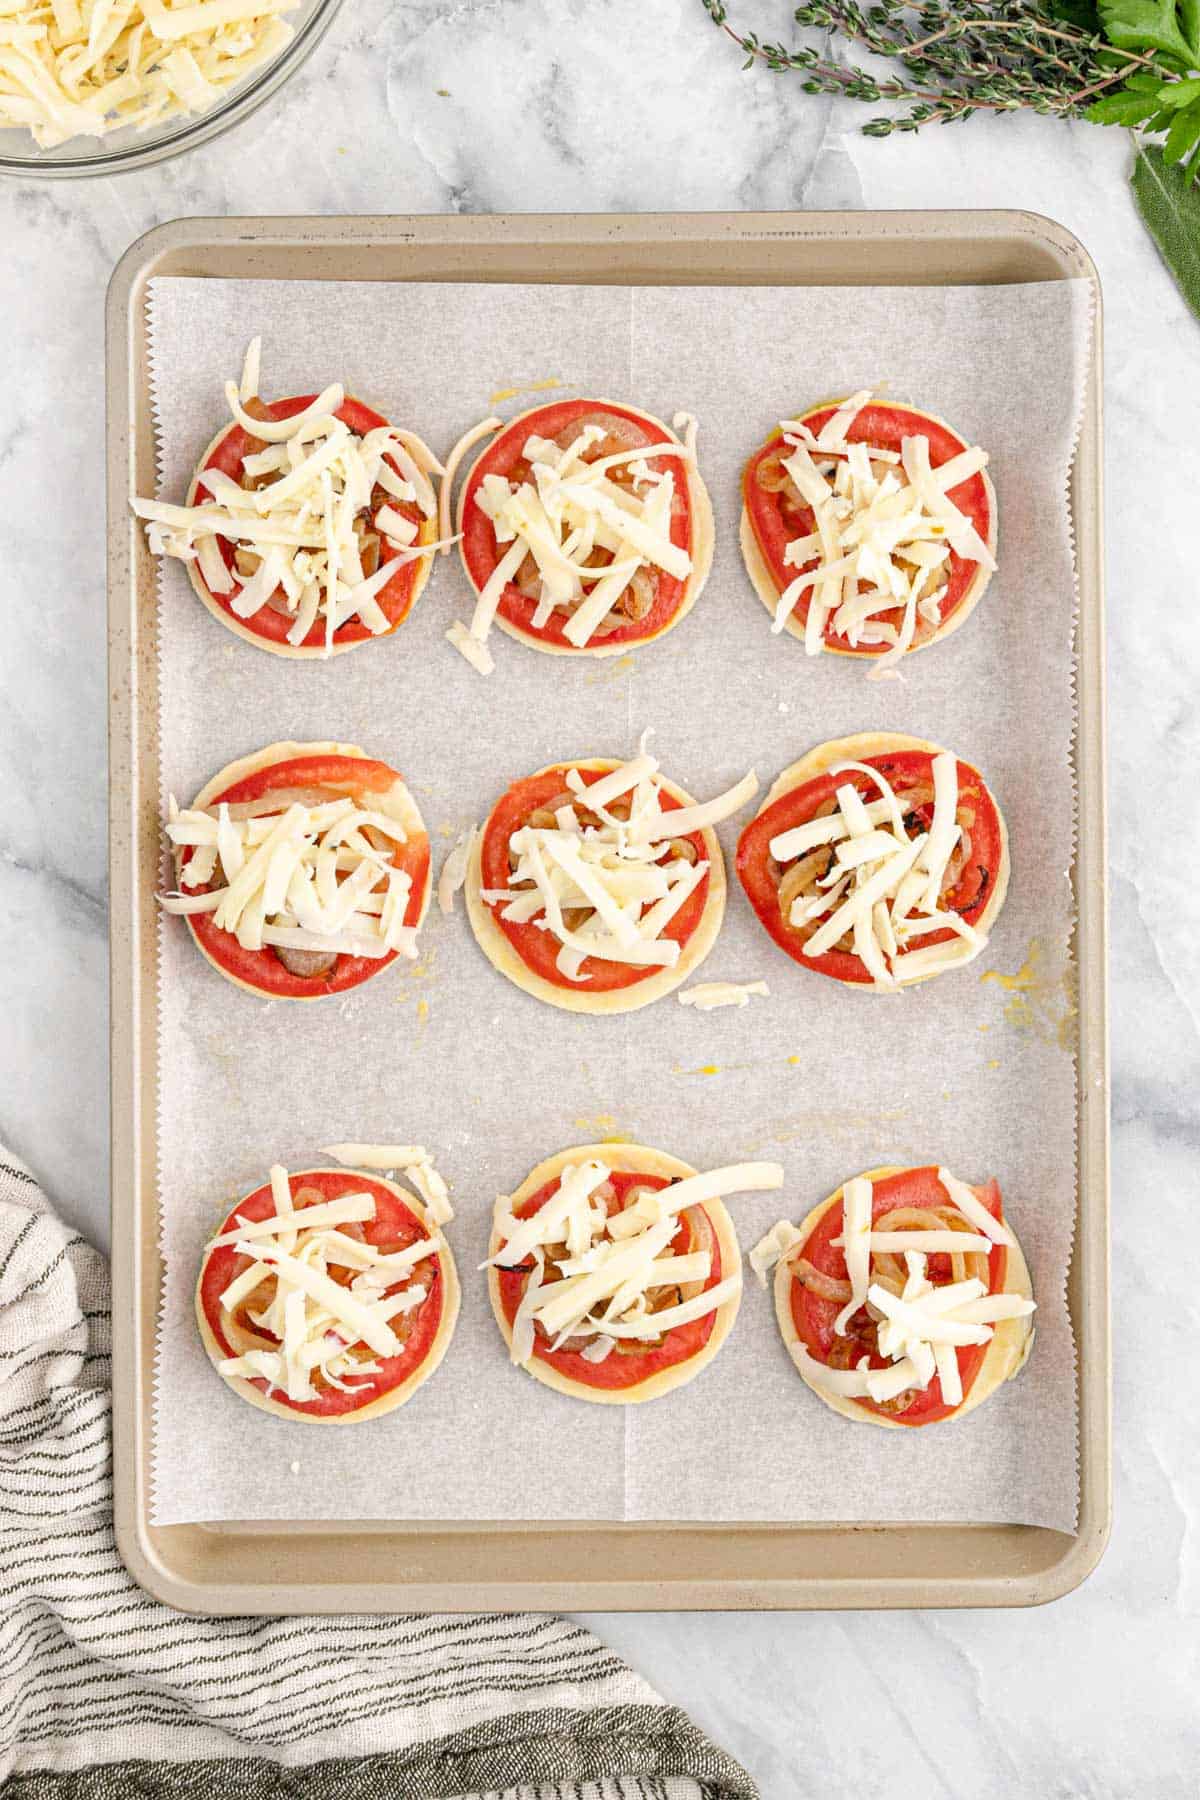 Cheese sprinkled over the tops of the tomatoes.